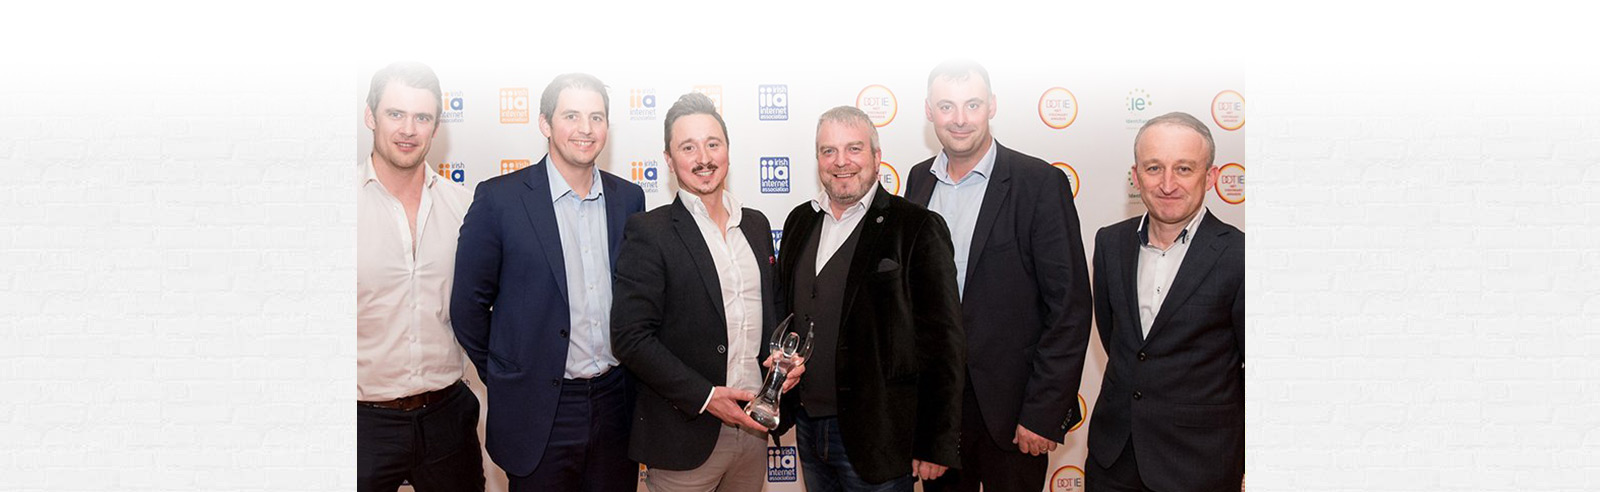 Supermac’s wins Best Mobile Service / Application Award